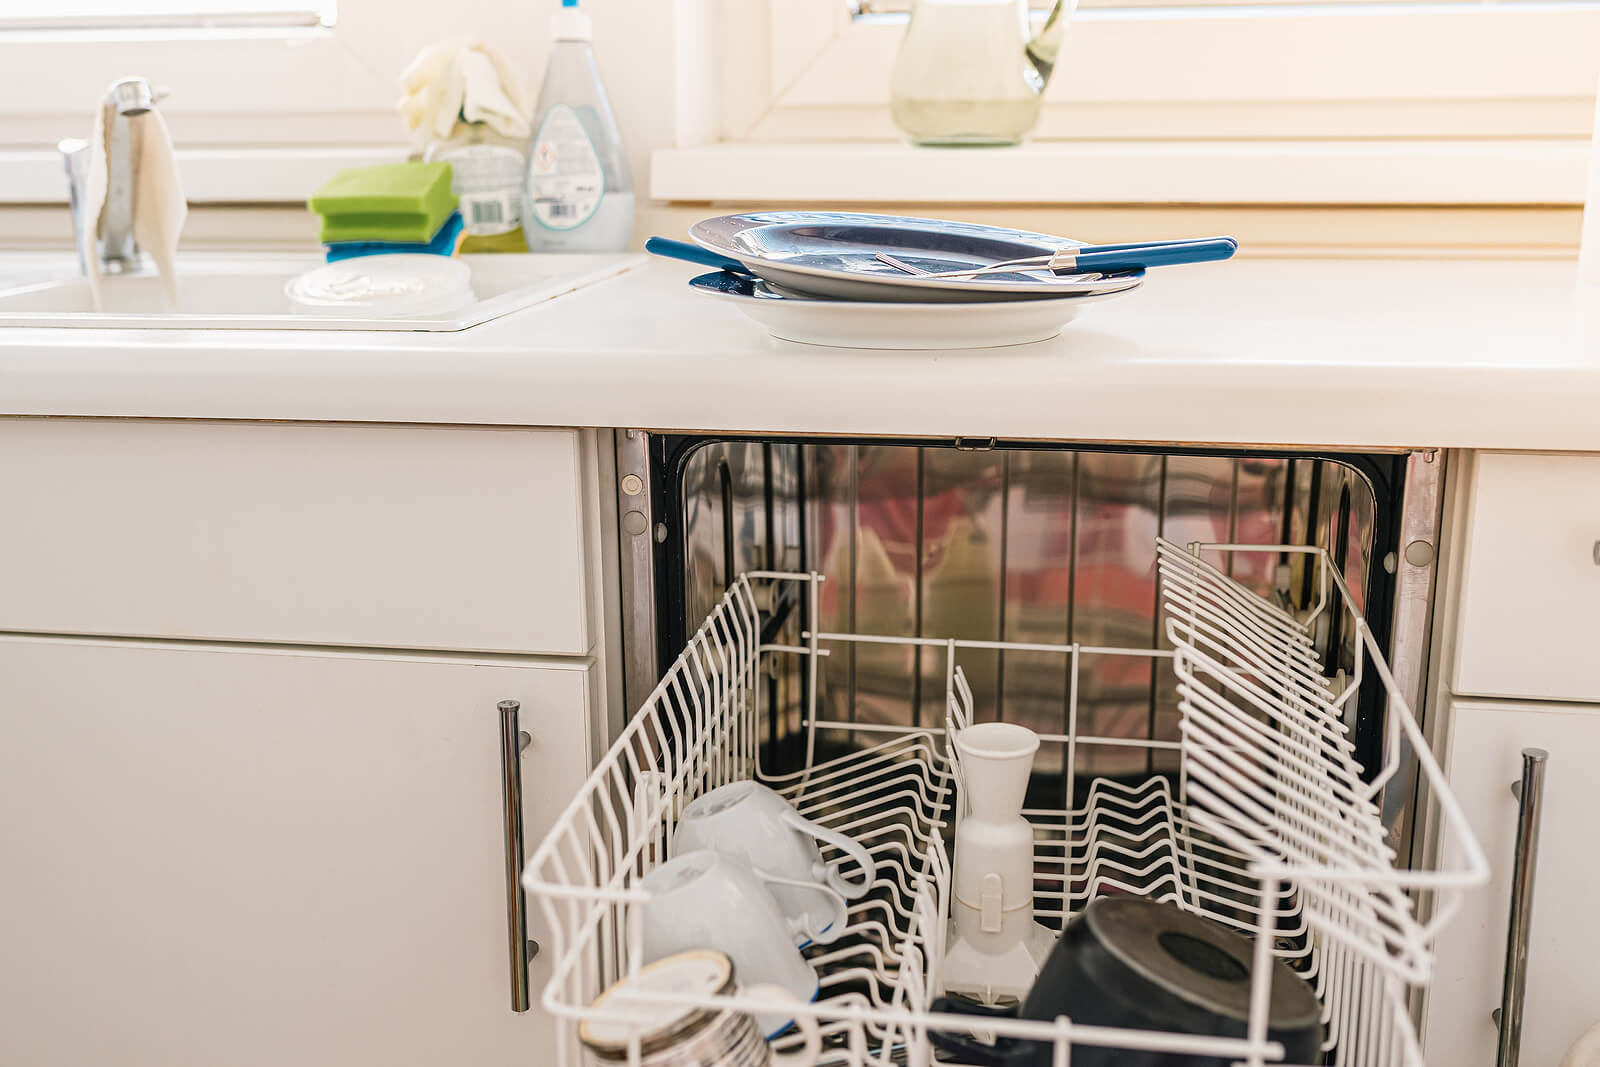 10 Reasons Why Your Dishwasher Isn't Draining